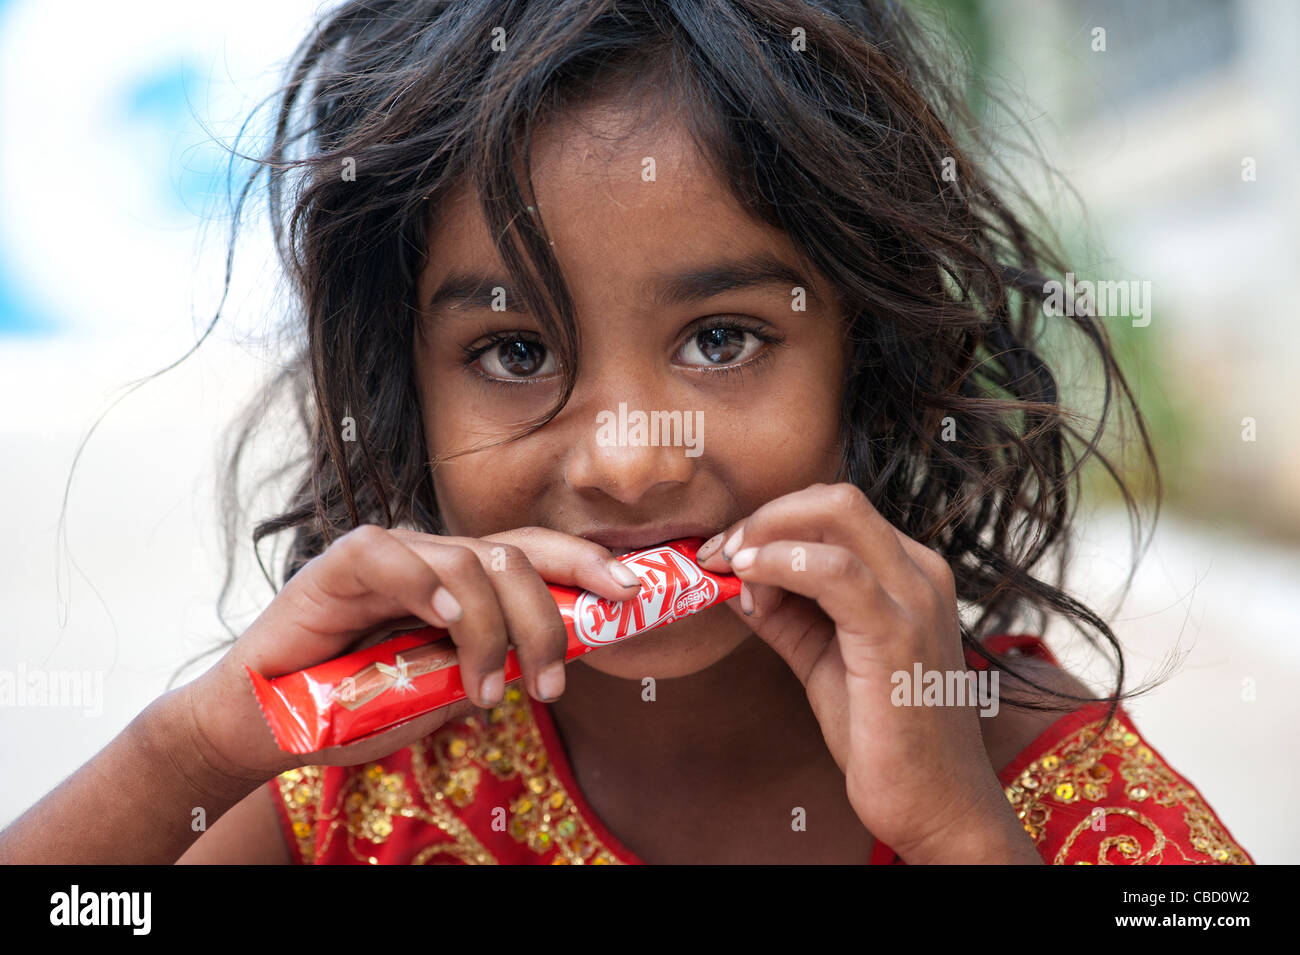 Young poor lower caste Indian street girl holding and opening a chocolate bar. Andhra Pradesh, India Stock Photo